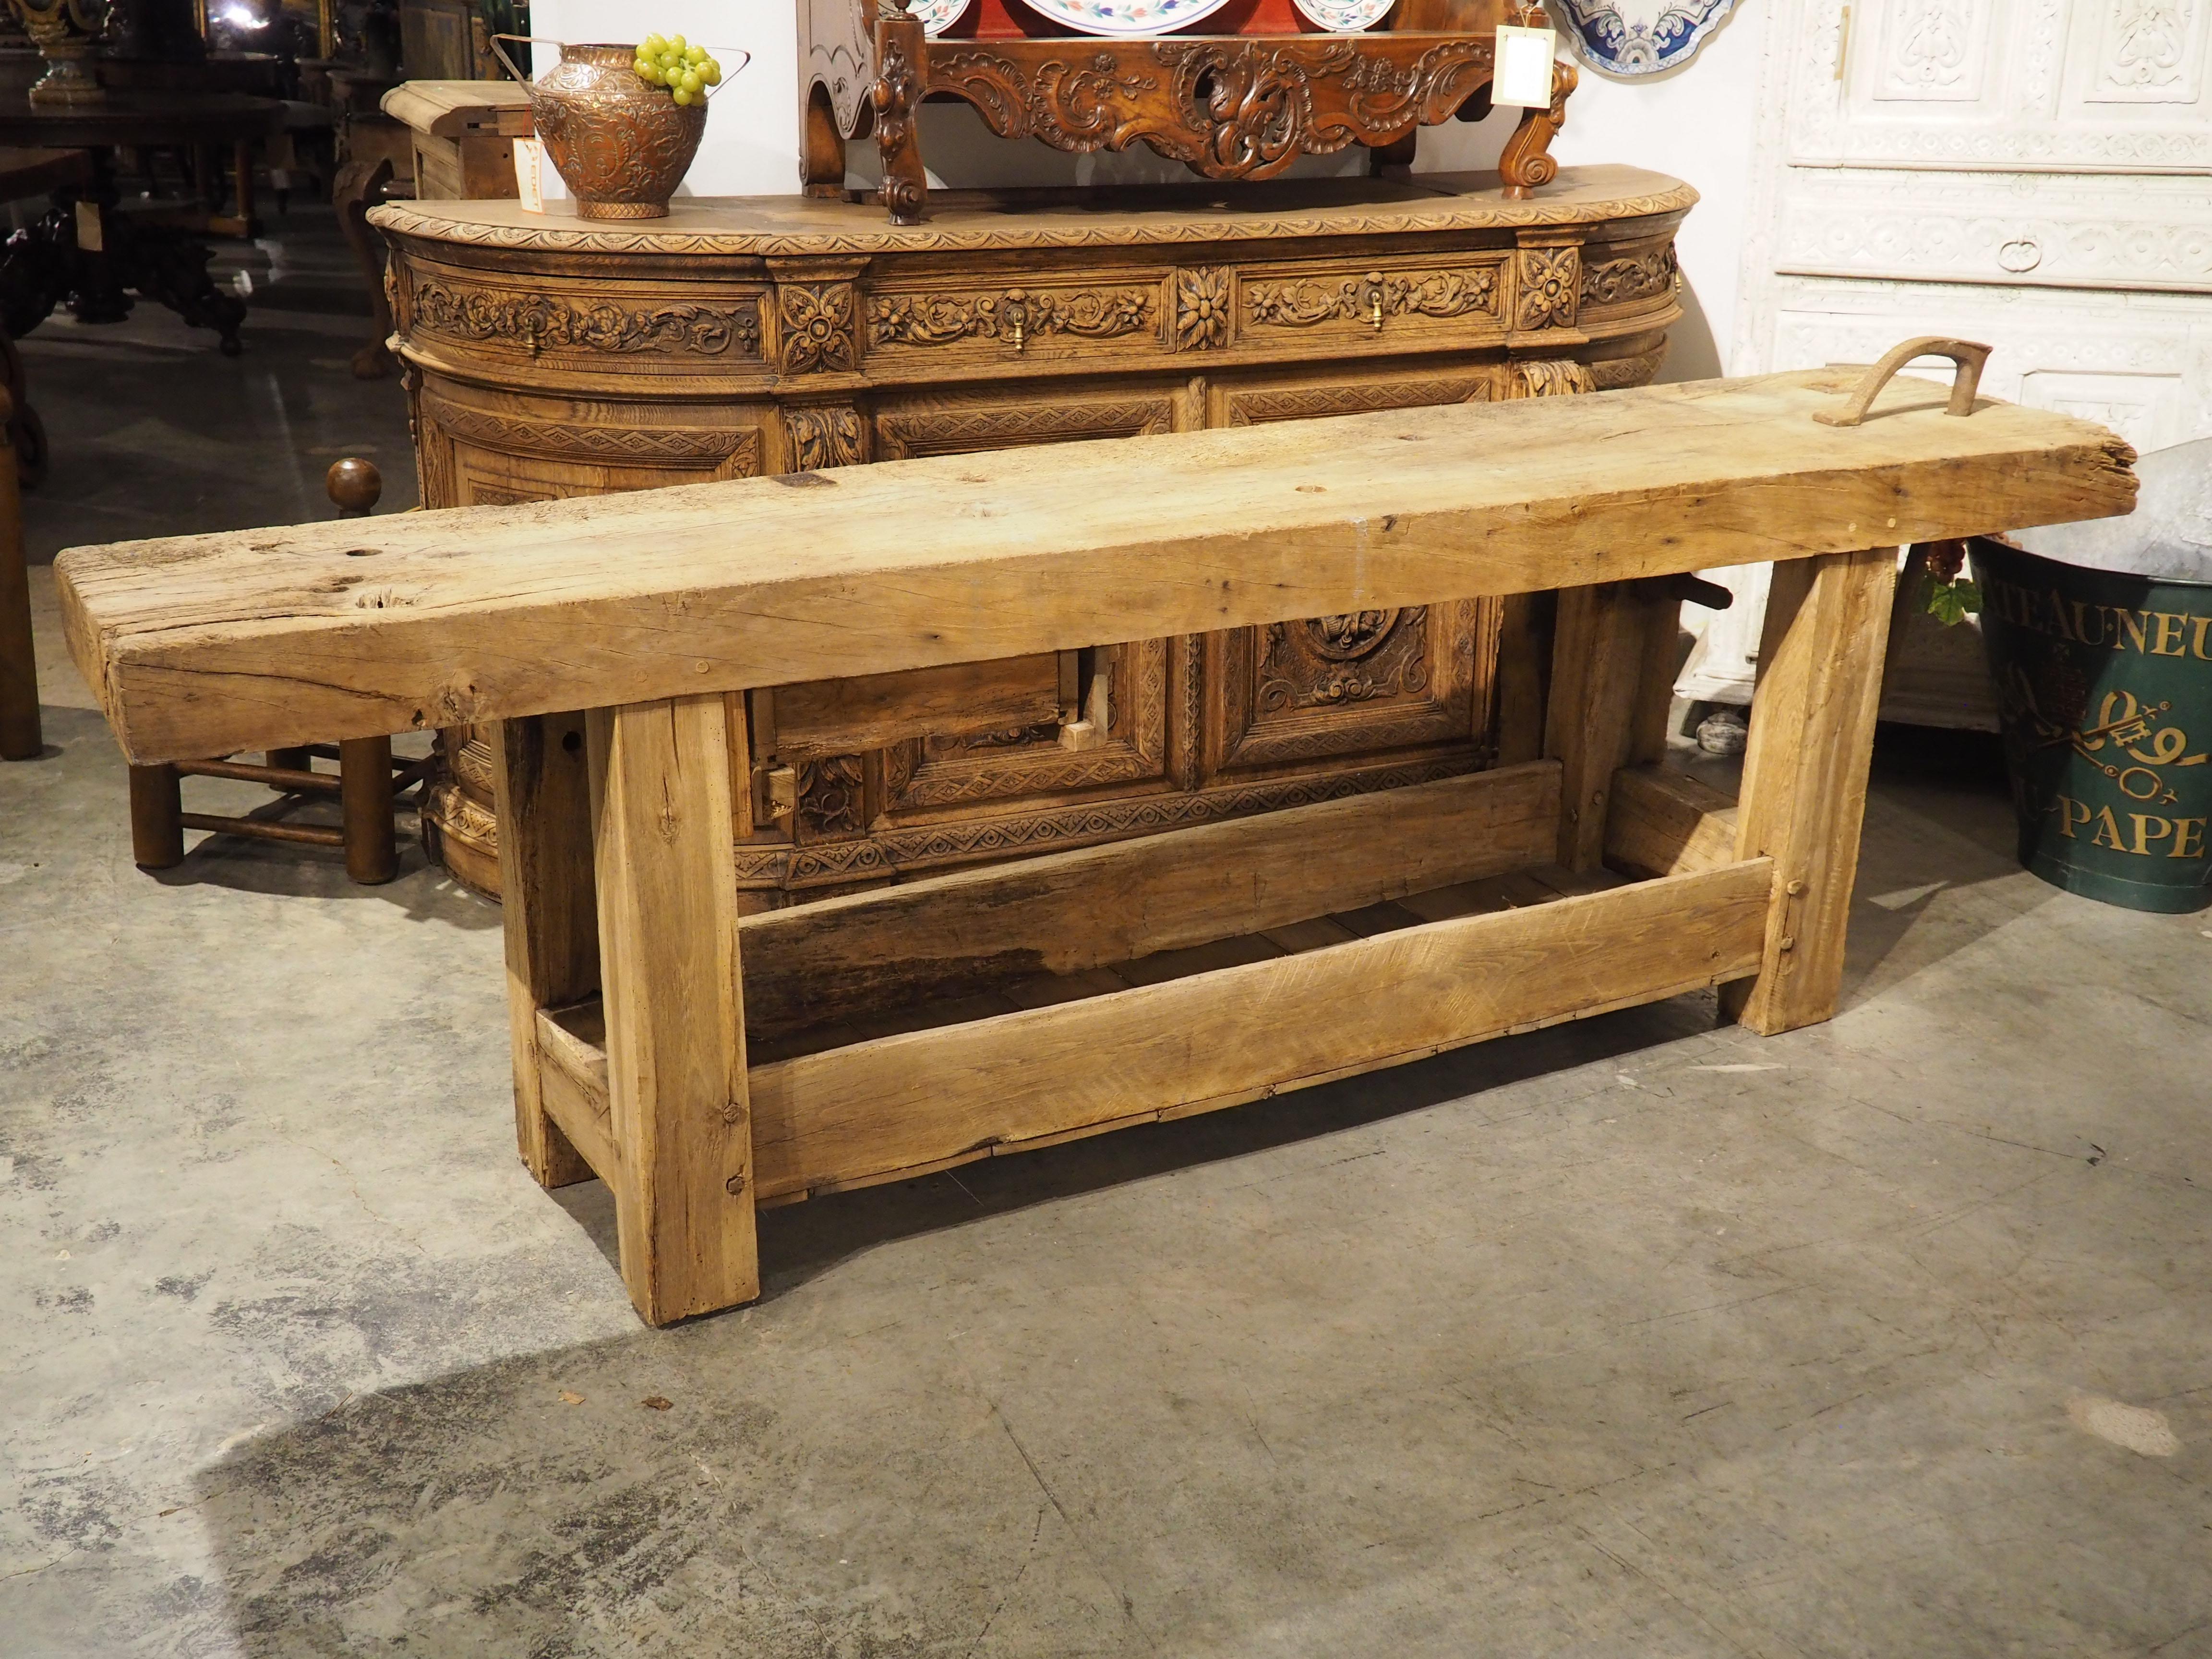 Originally the work bench for a French carpenter, this fantastic antique industrial table offers a storage shelf beneath, as well as a small drawer under the four-inch thick top. Hand-carved circa 1890, the wood has been bleached more recently